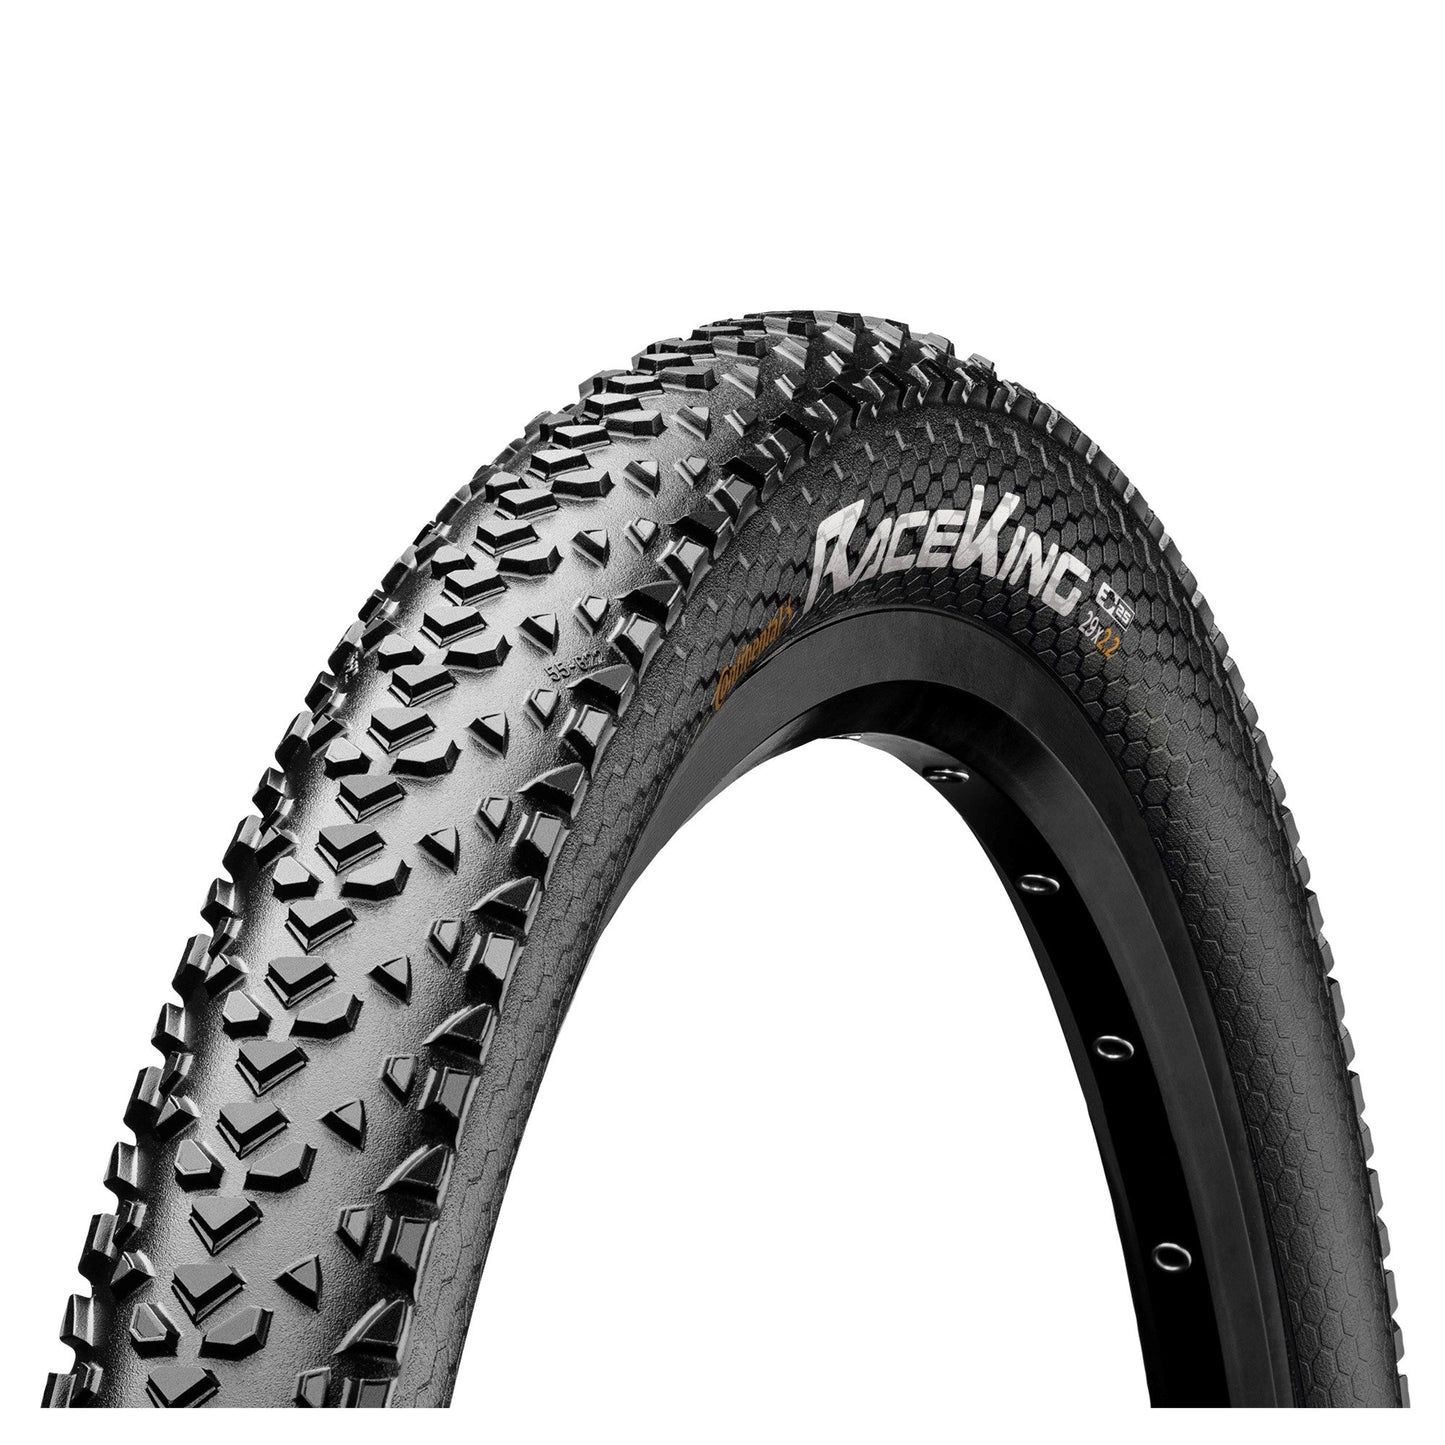 CONTINENTAL RACE KING 29" WIRED MTB TYRE